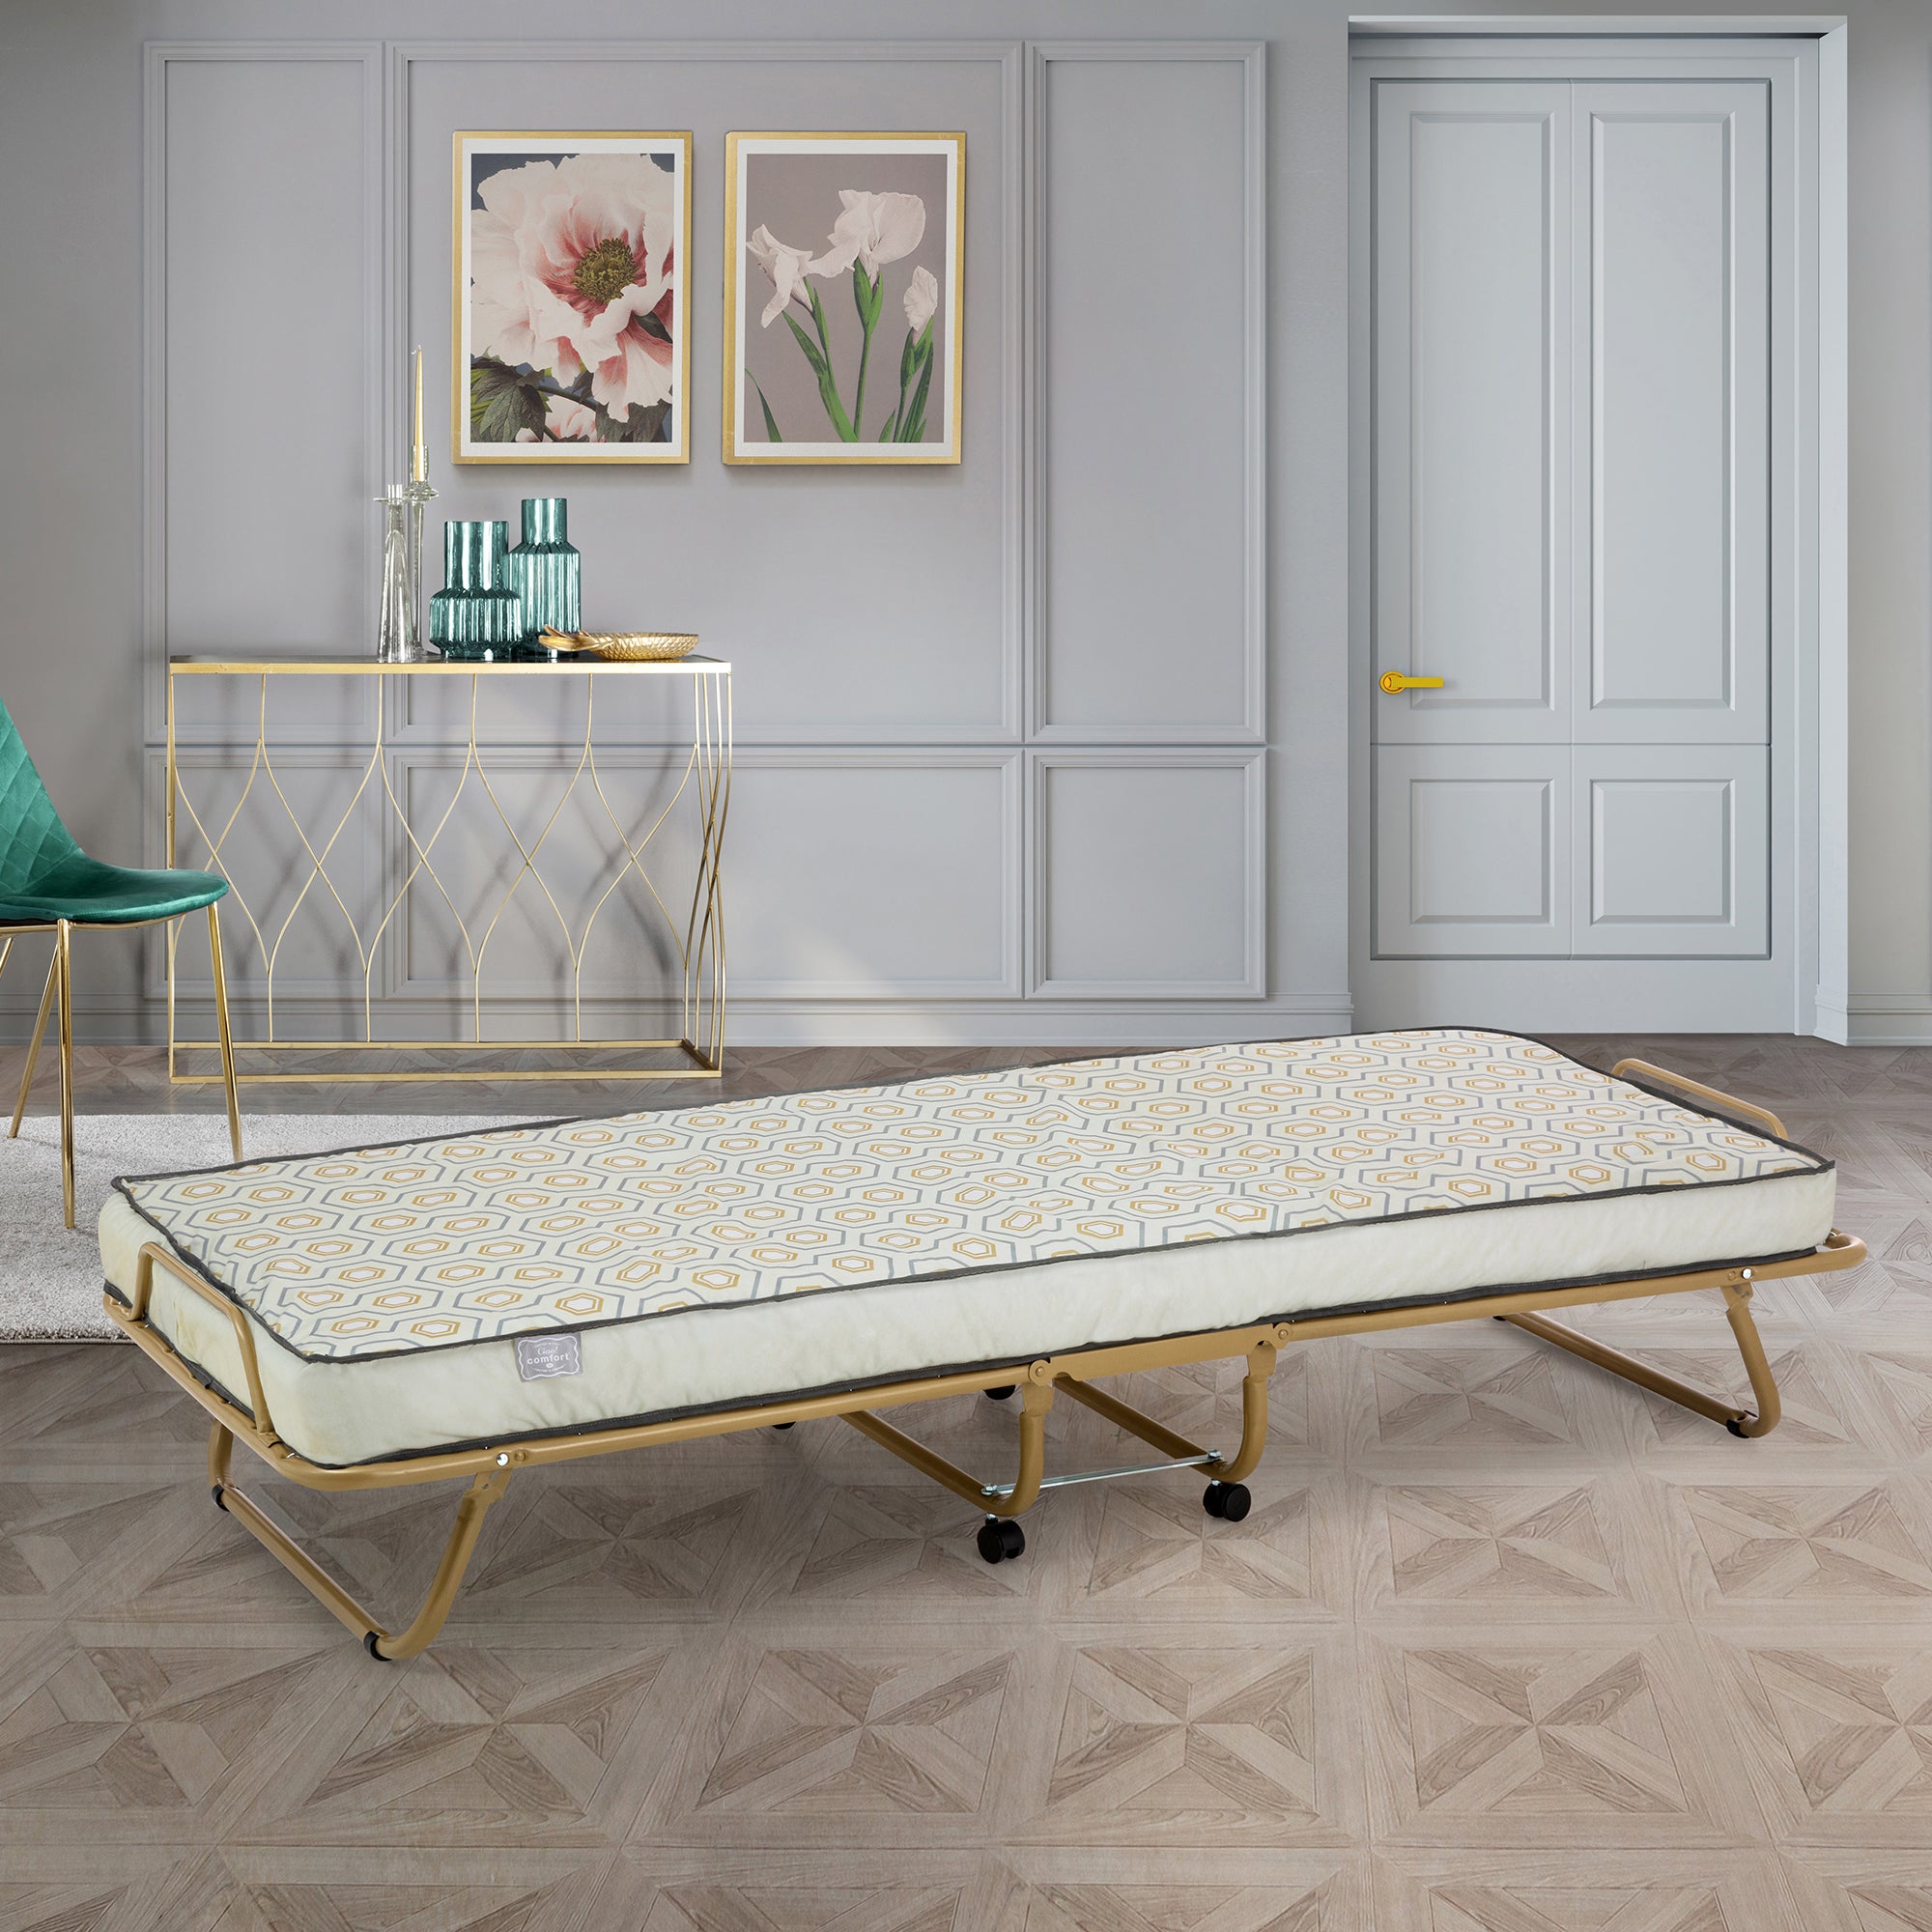 Gold folding bed with ivory mattress